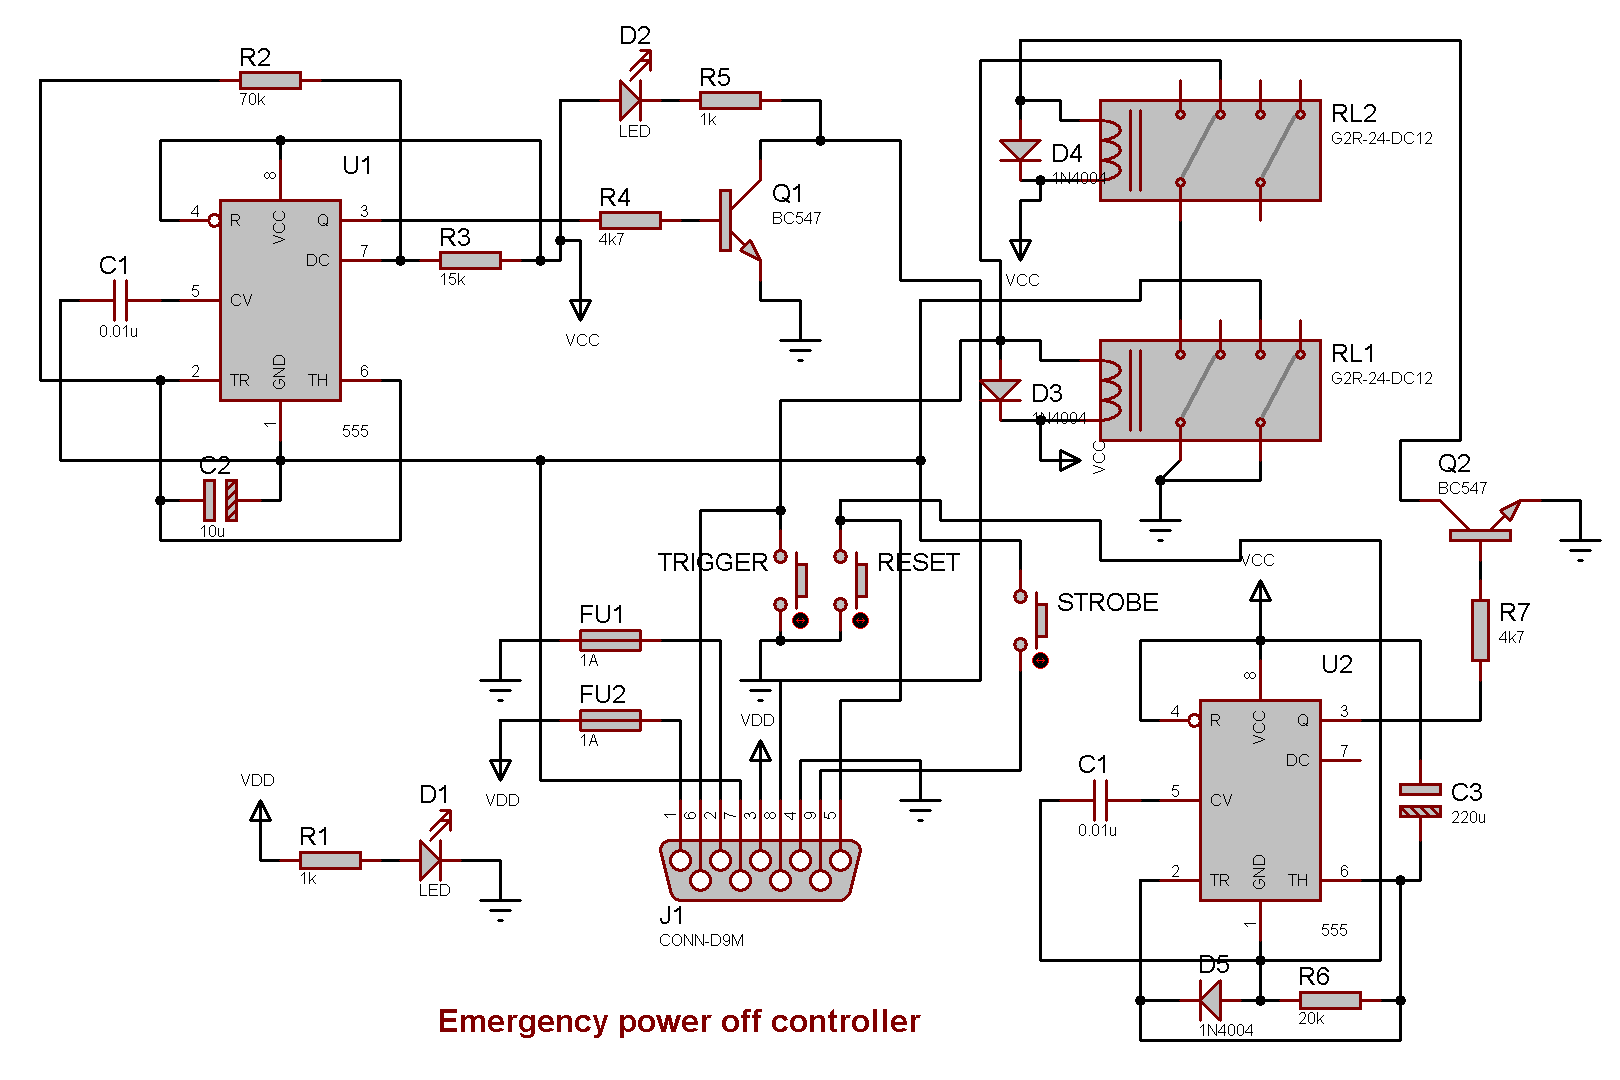 Schematics for the emergency power off controller